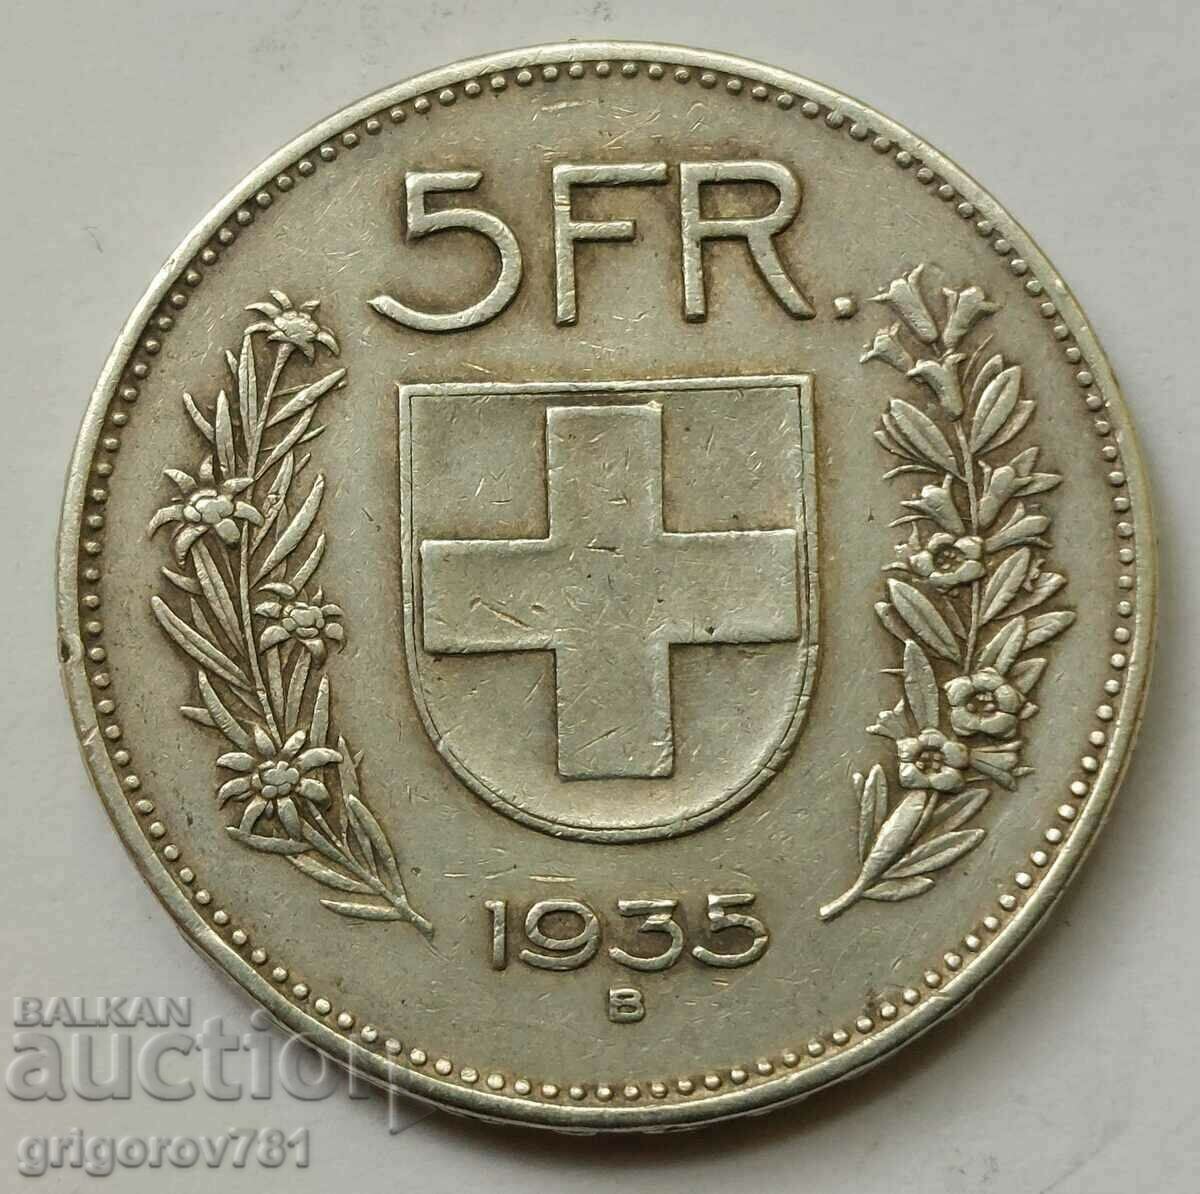 5 francs silver Switzerland 1935 B - silver coin